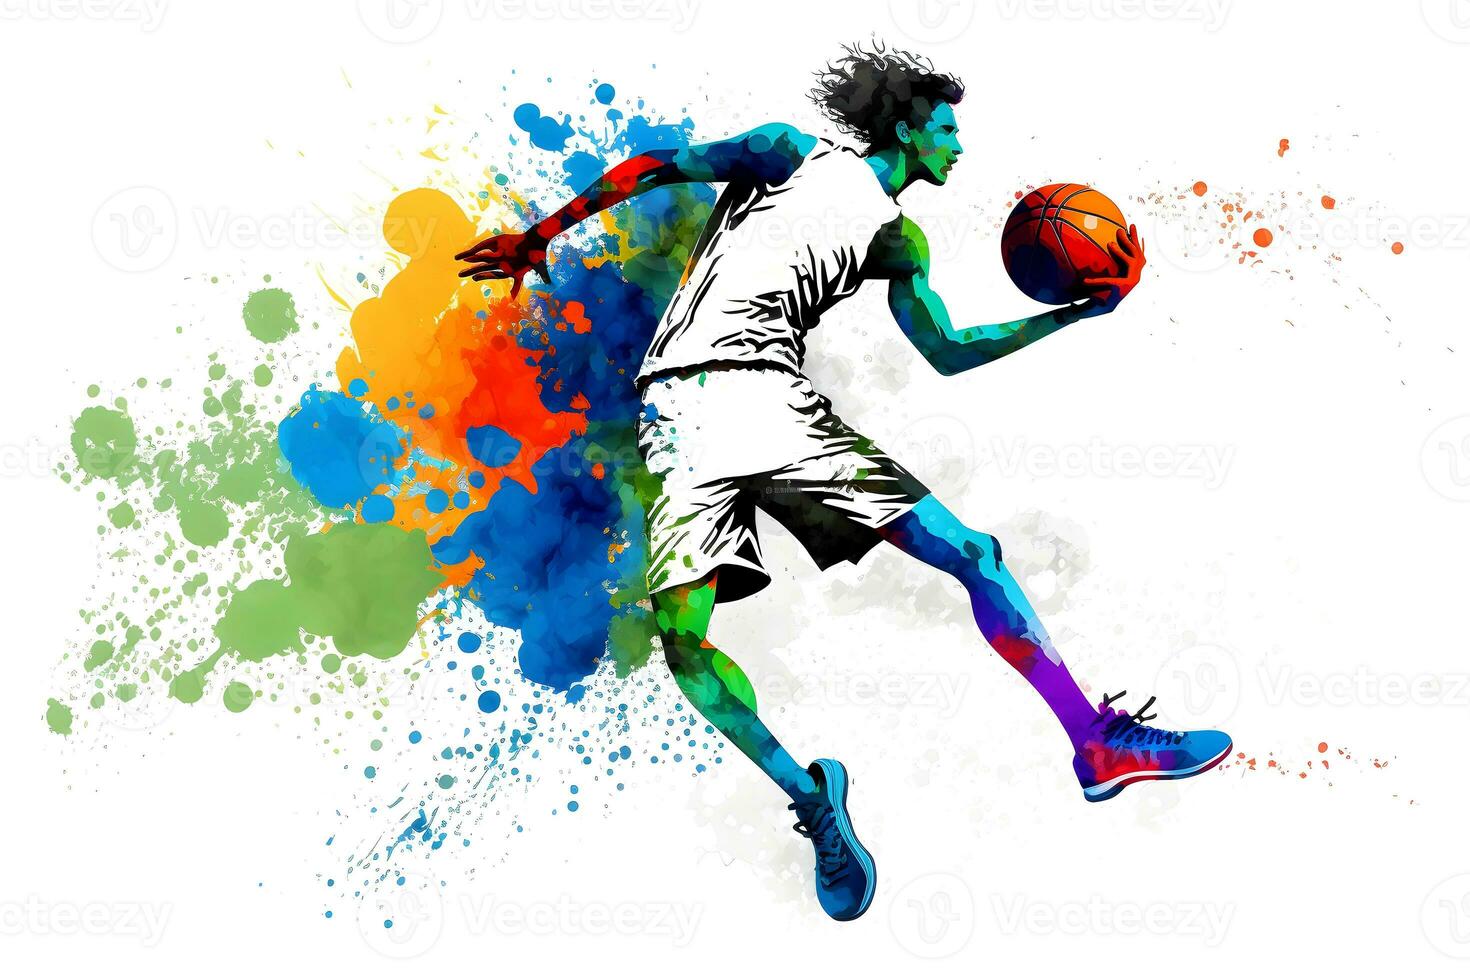 Basketball watercolor splash player in action with a ball isolated on white background. Neural network generated art photo